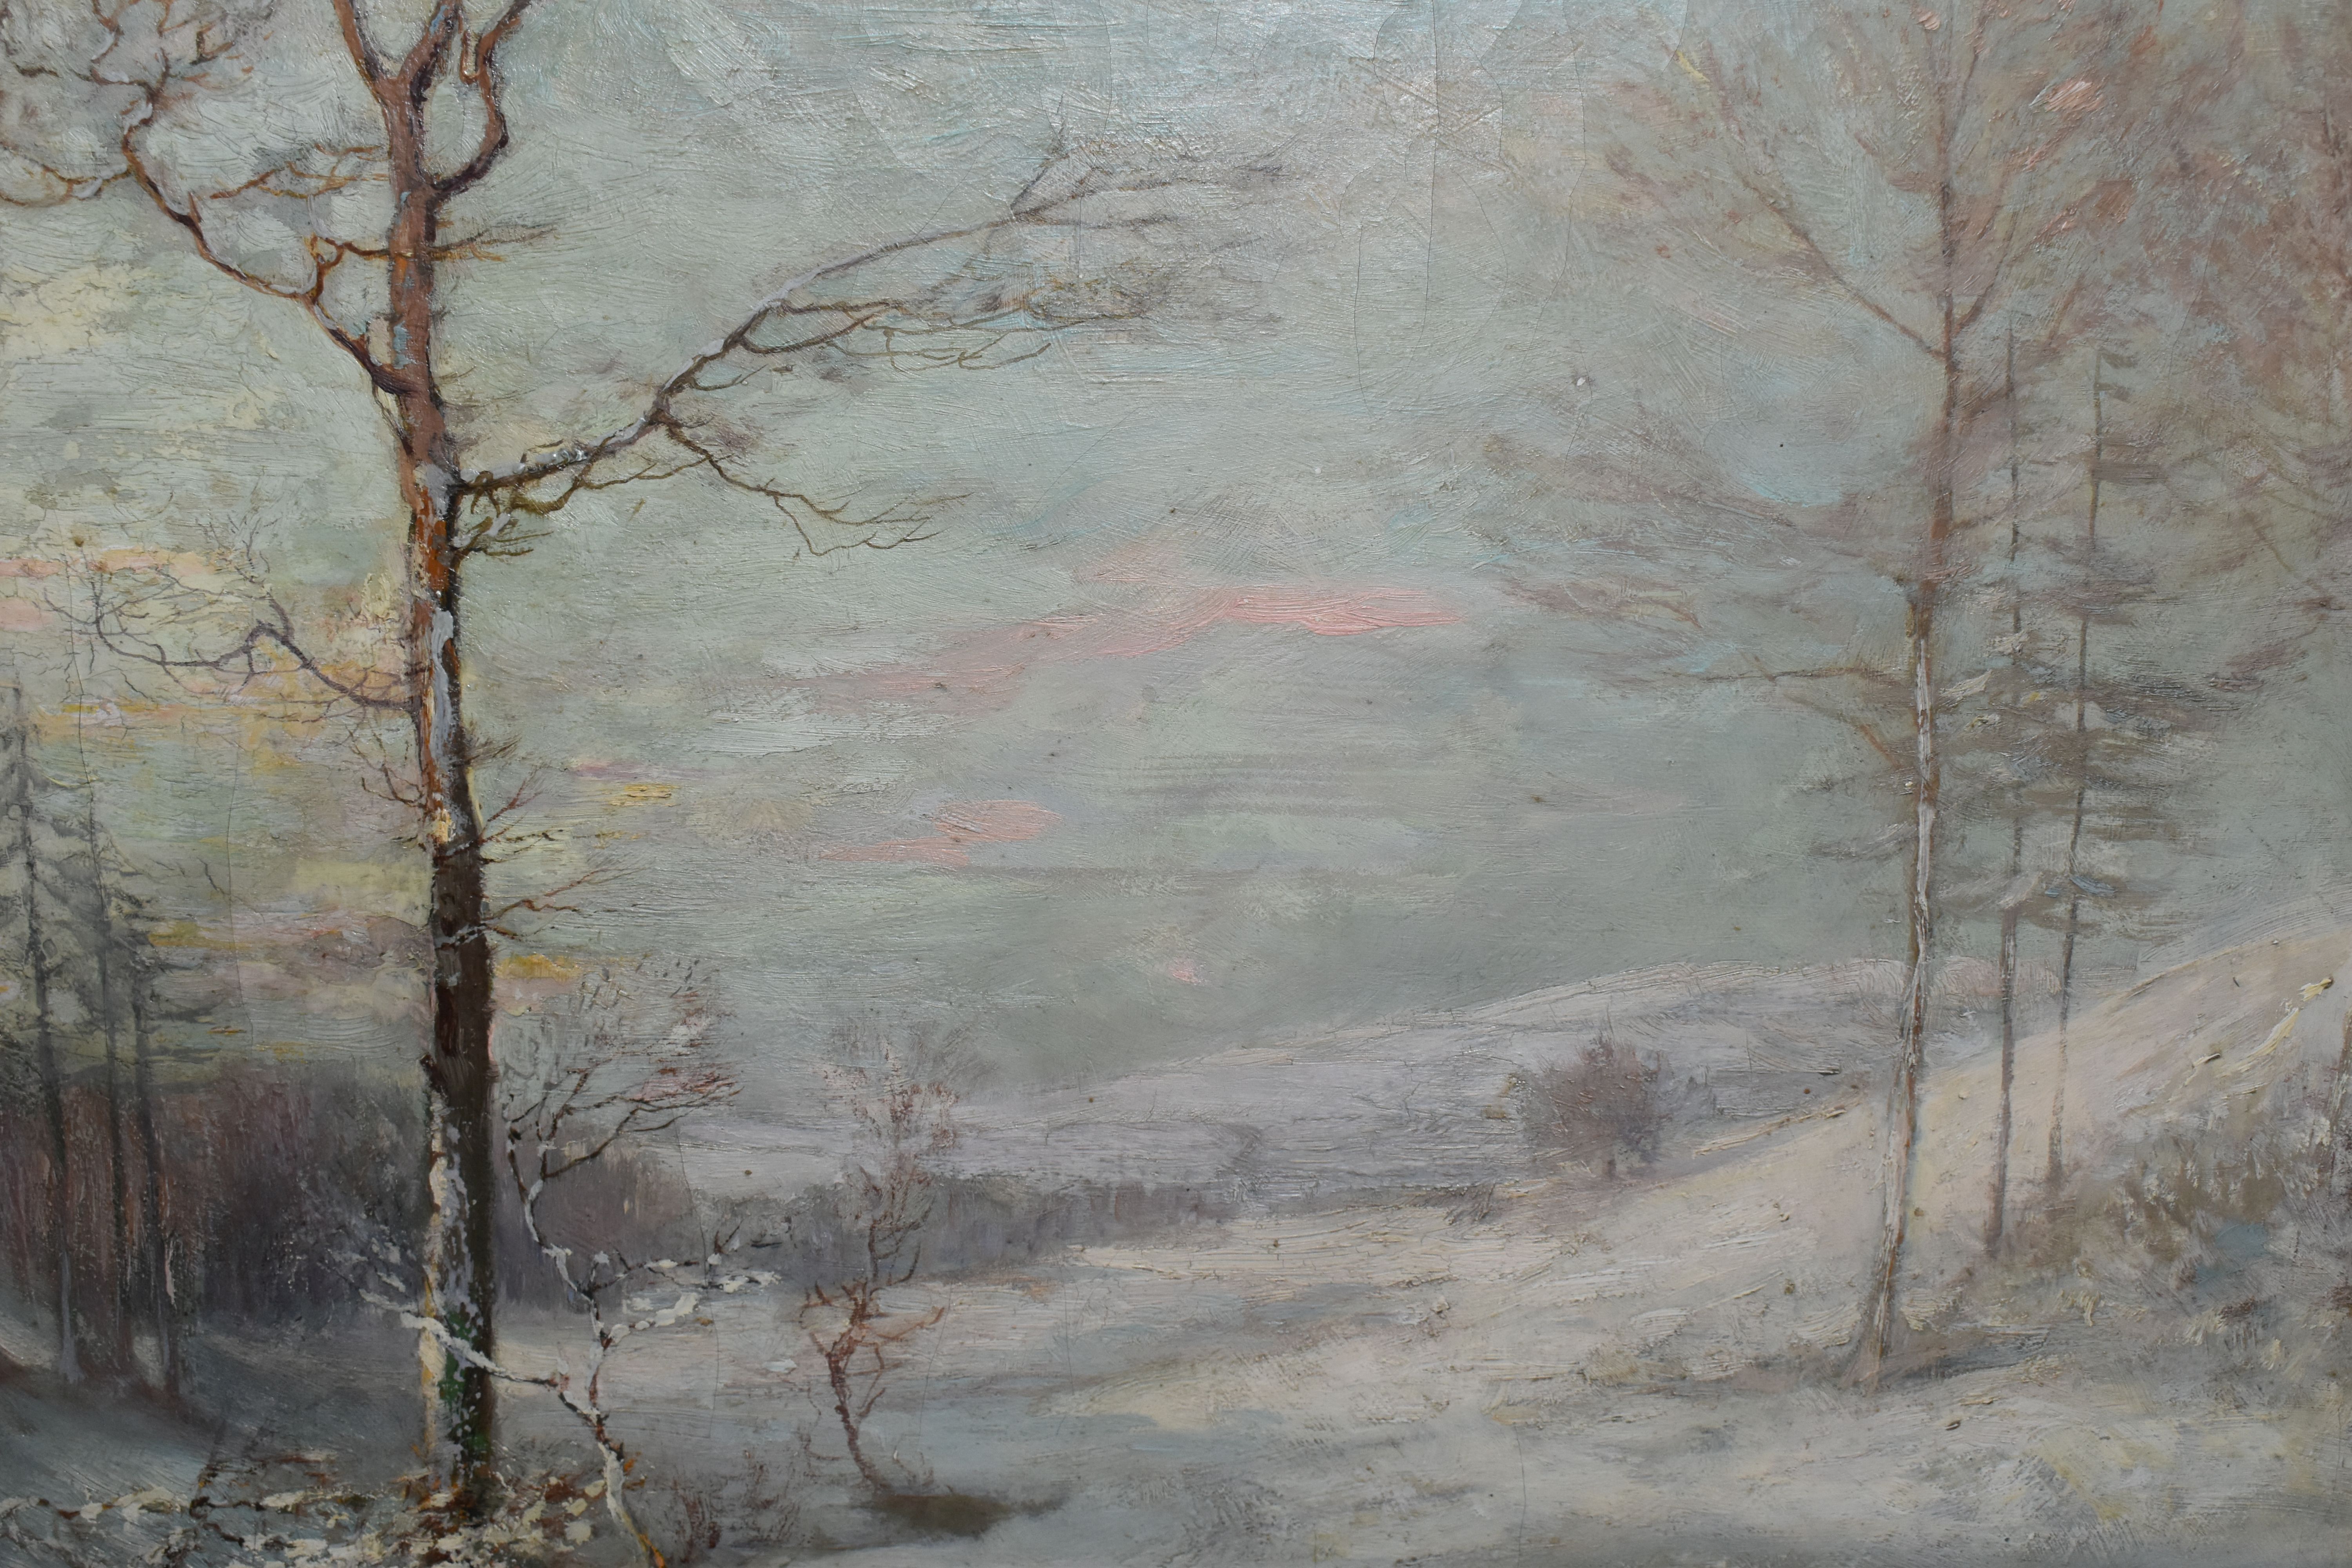 AUSTIN WINTERBOTTOM (1860-1919) TWO WINTER LANDSCAPES, the first depicts a stream running through - Image 8 of 10